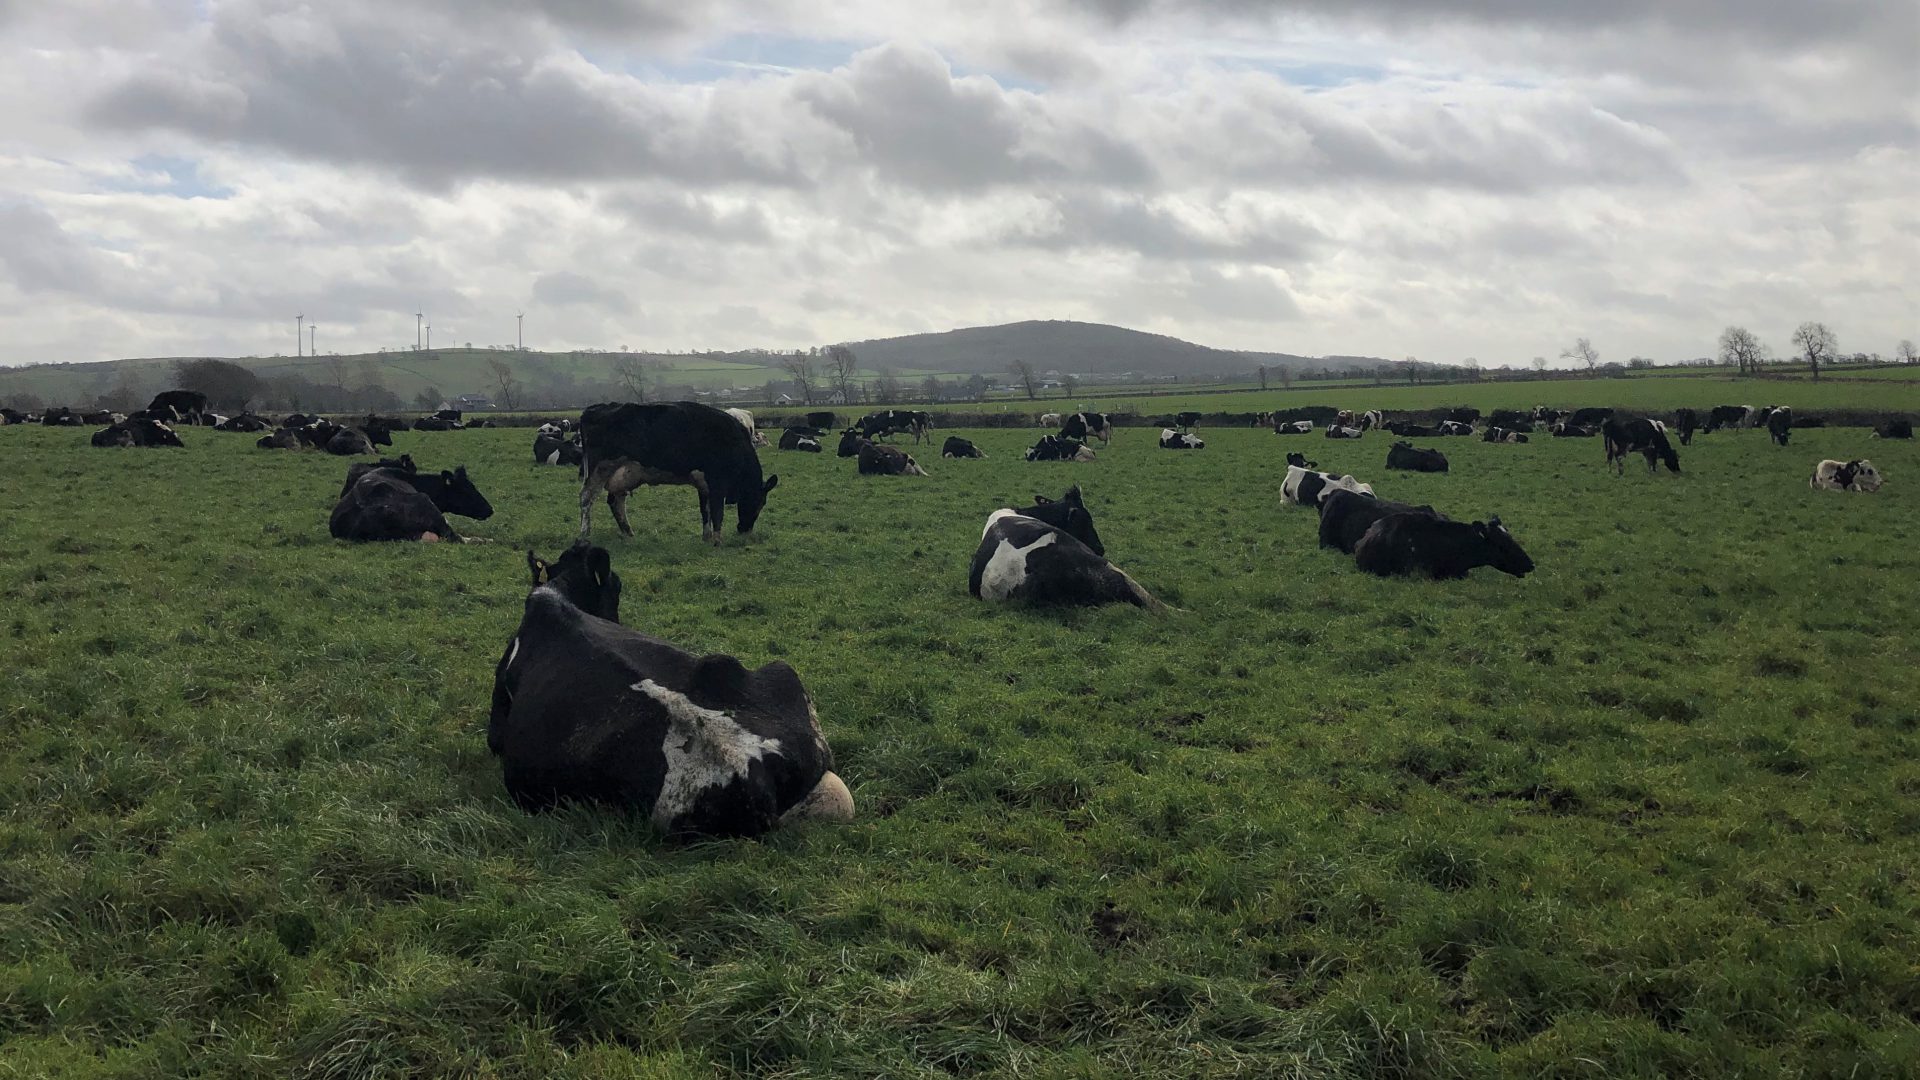 Grazing Management is Key After Heavy Rain